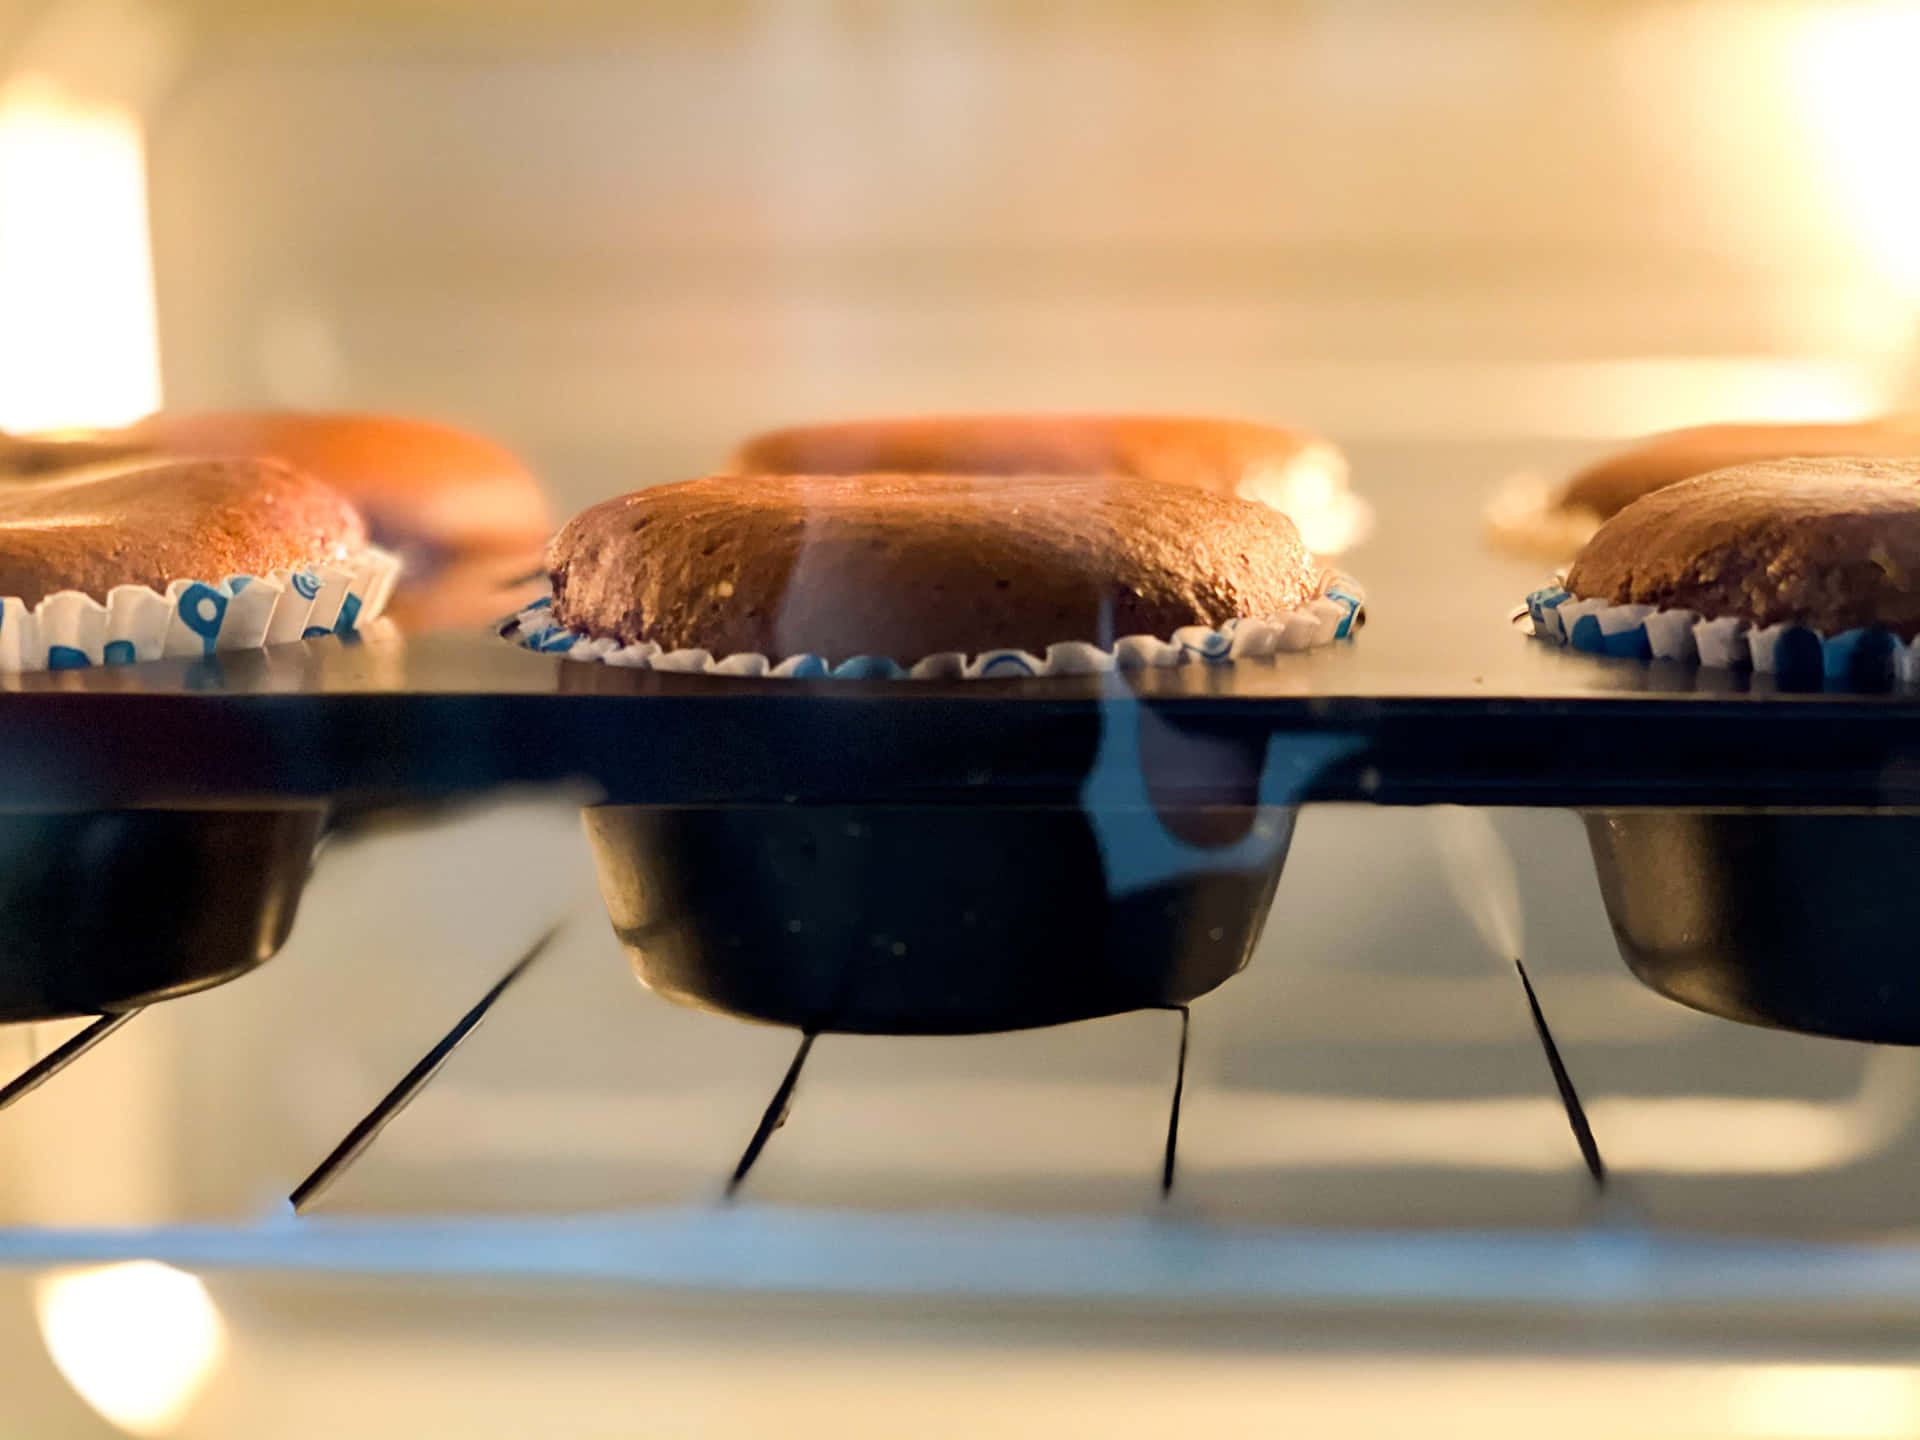 A Group Of Cupcakes In An Oven